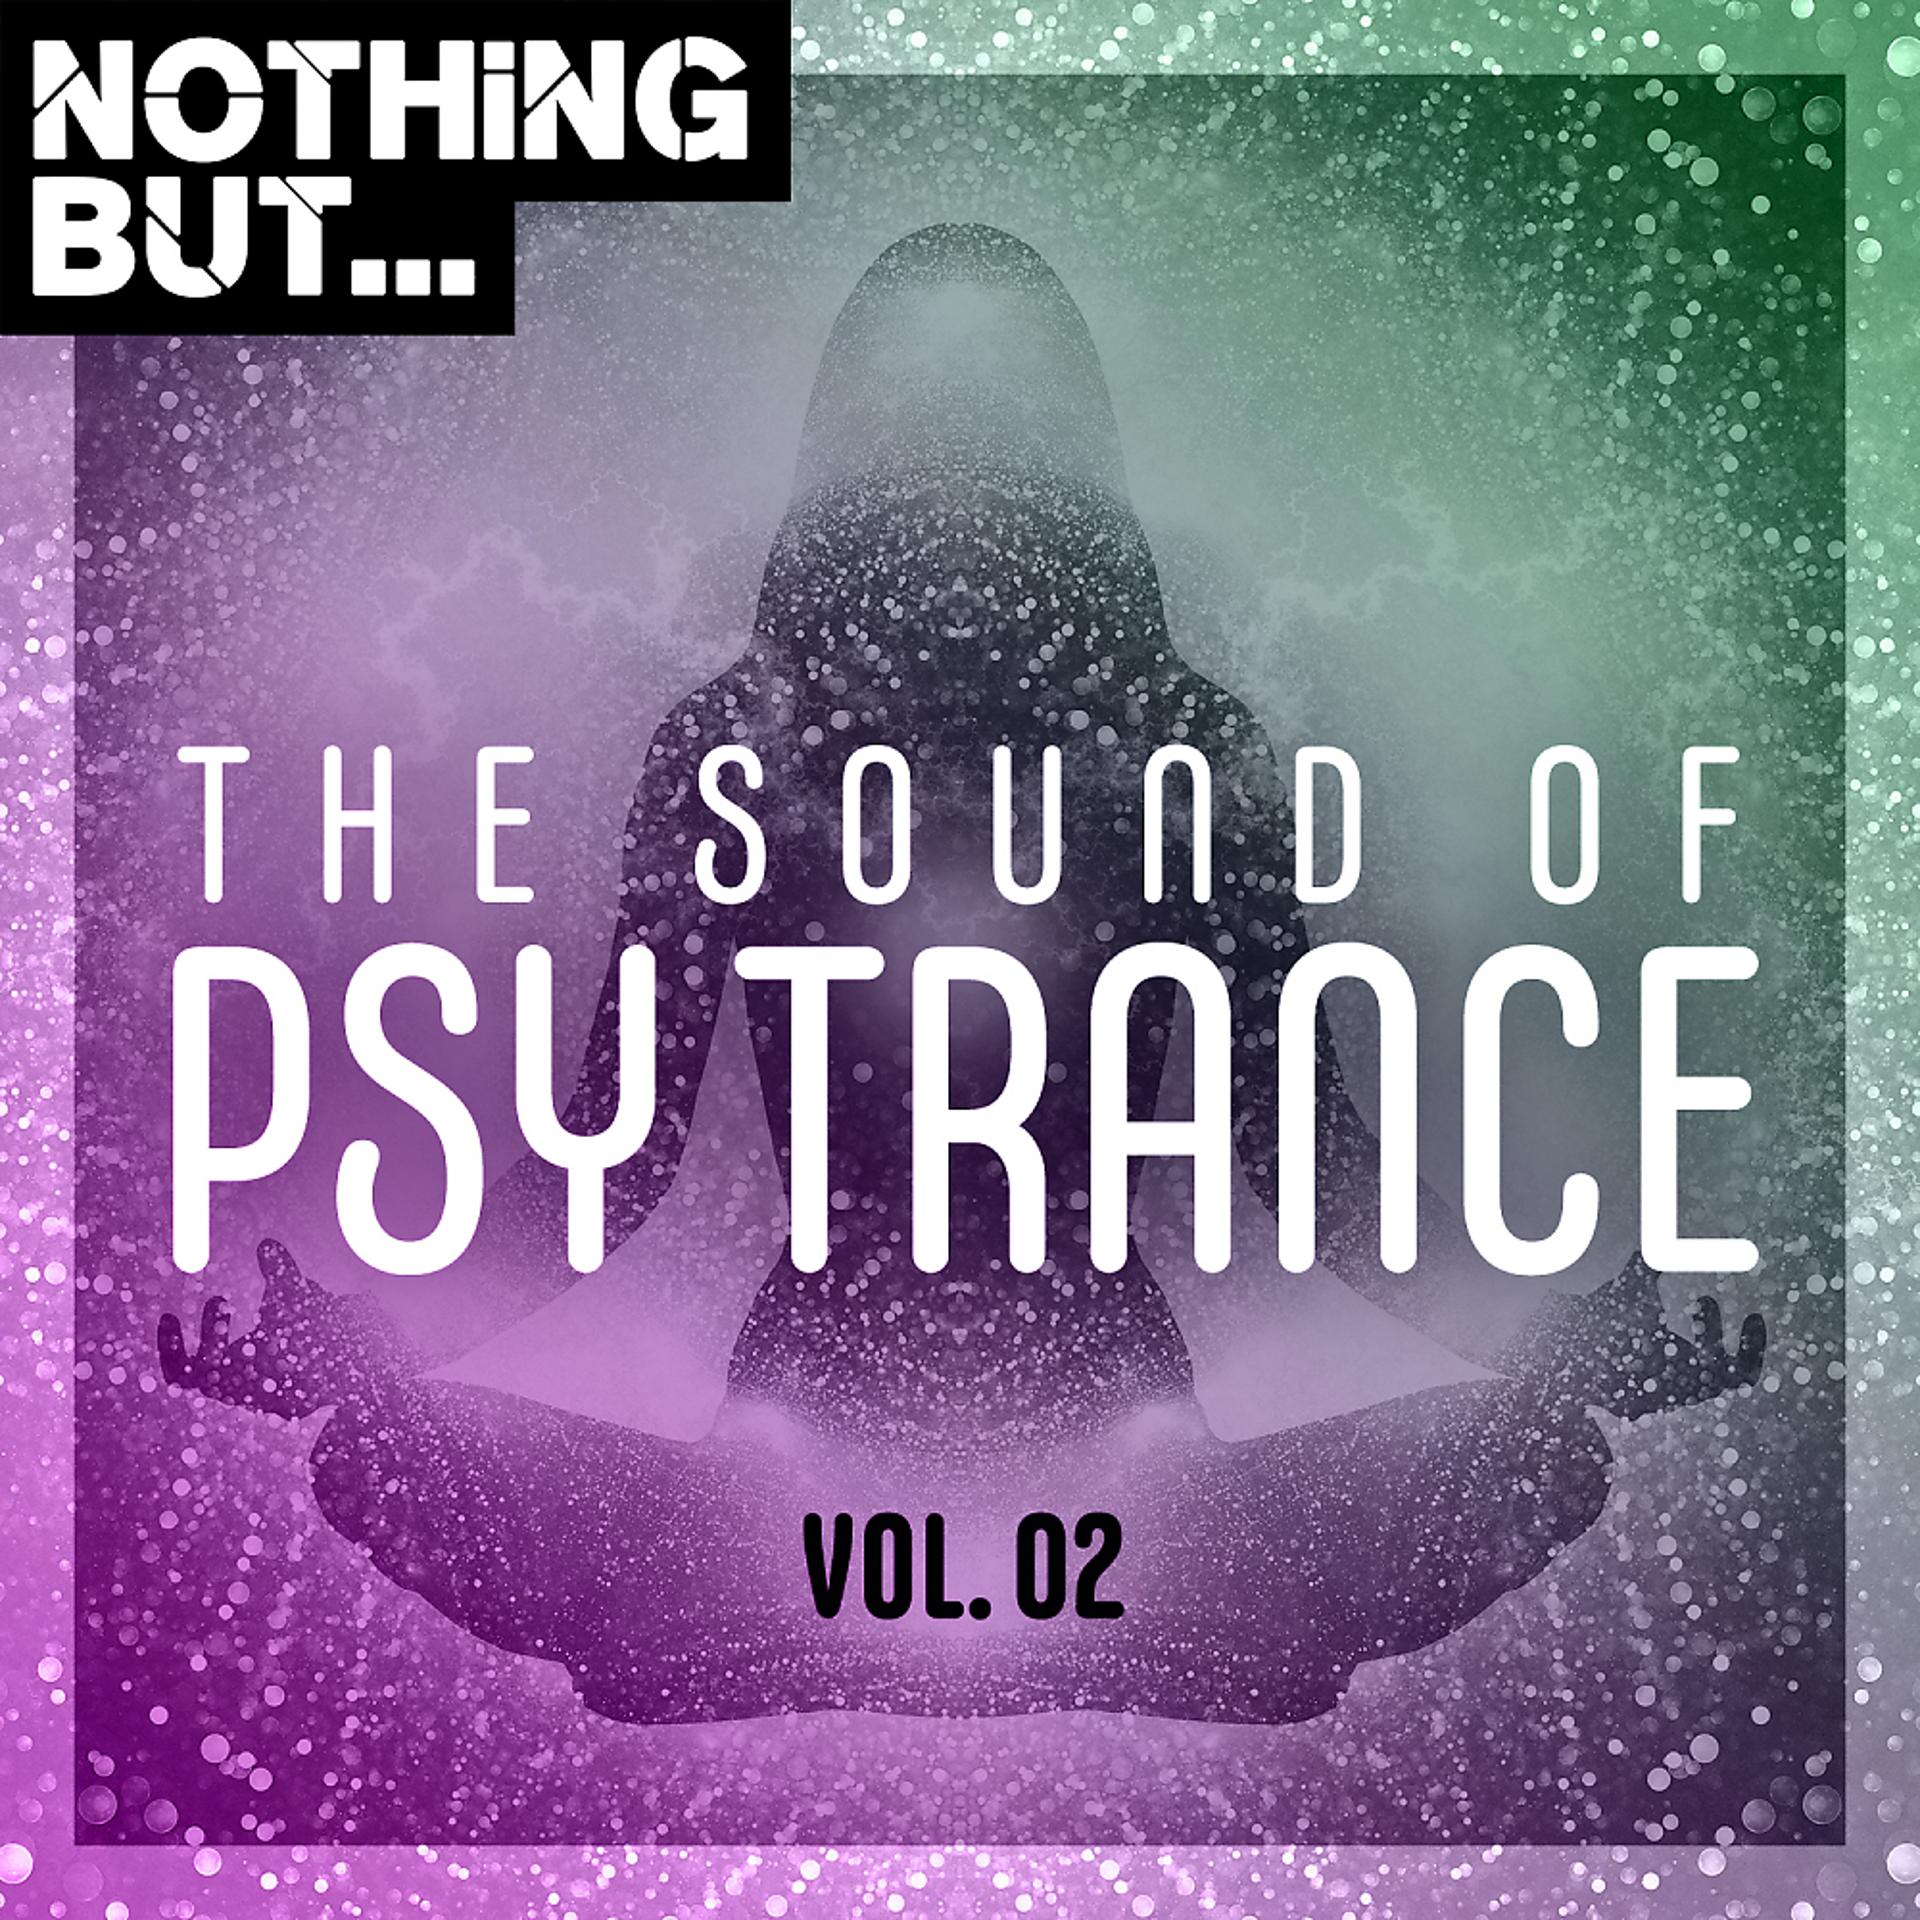 Постер альбома Nothing But... The Sound of Psy Trance, Vol. 02